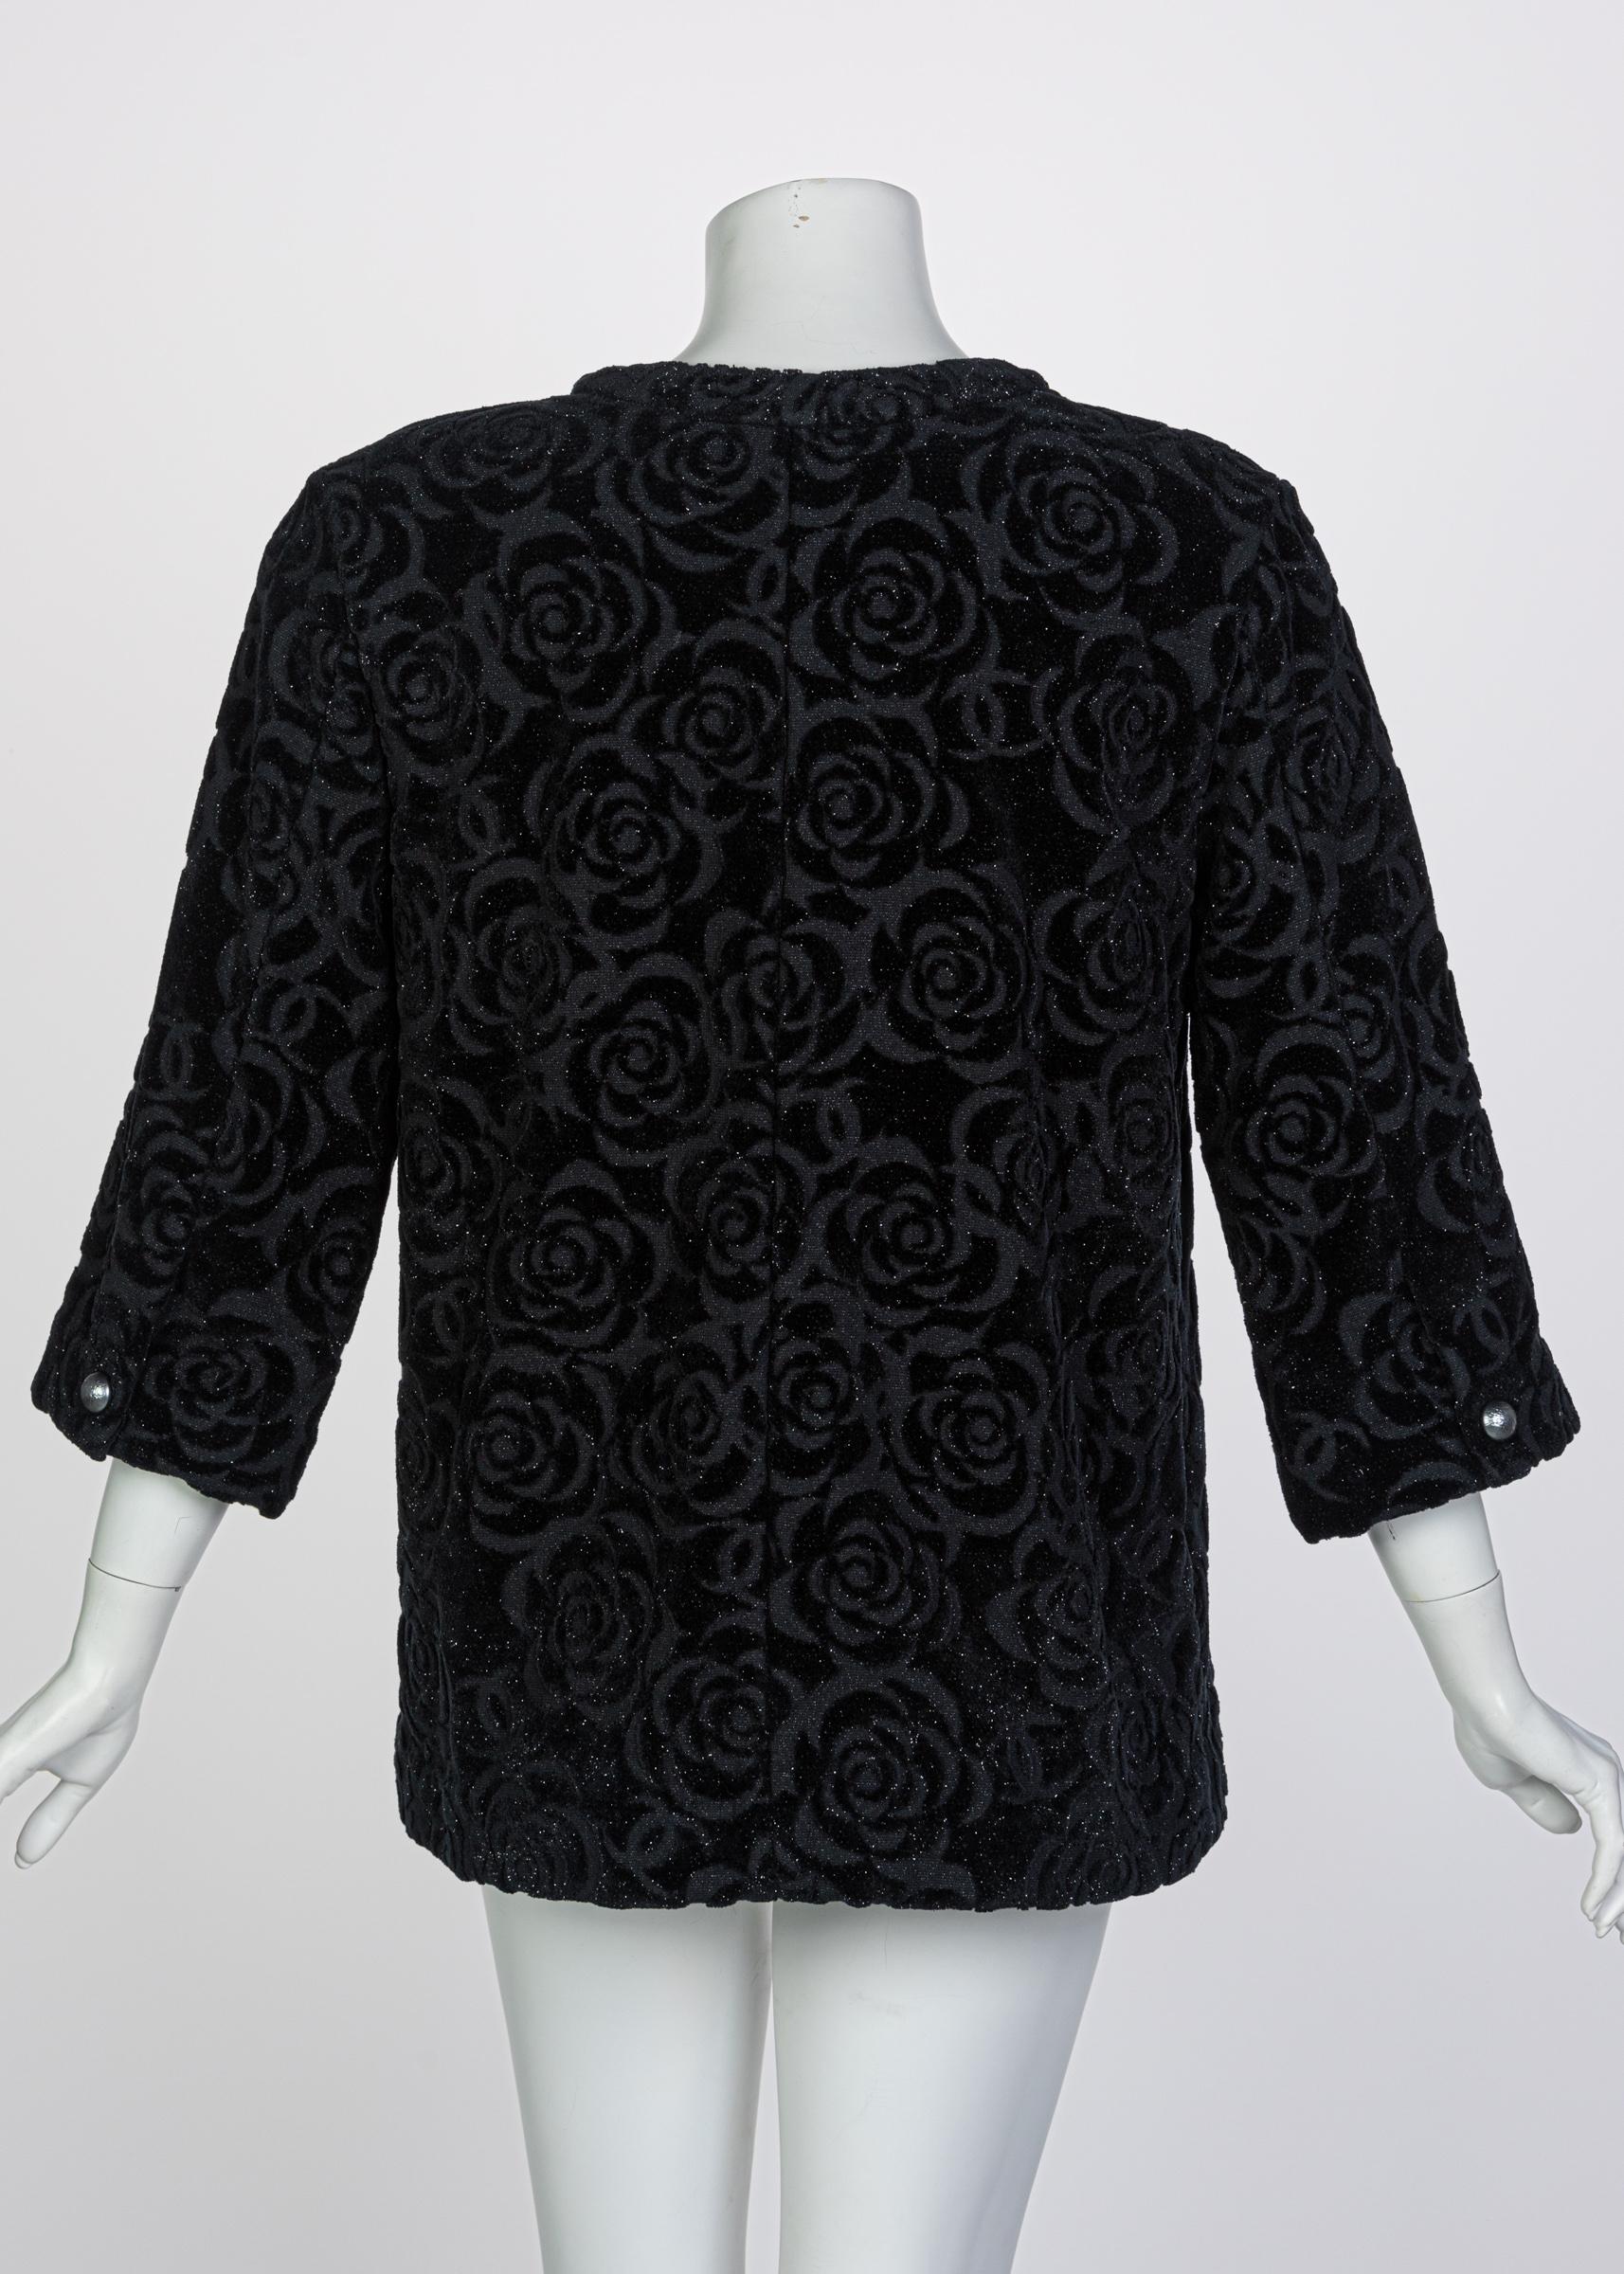 Women's or Men's Chanel New with Tags Black Shimmer Cotton Velour Camellia Jacket Pre Fall, 2018